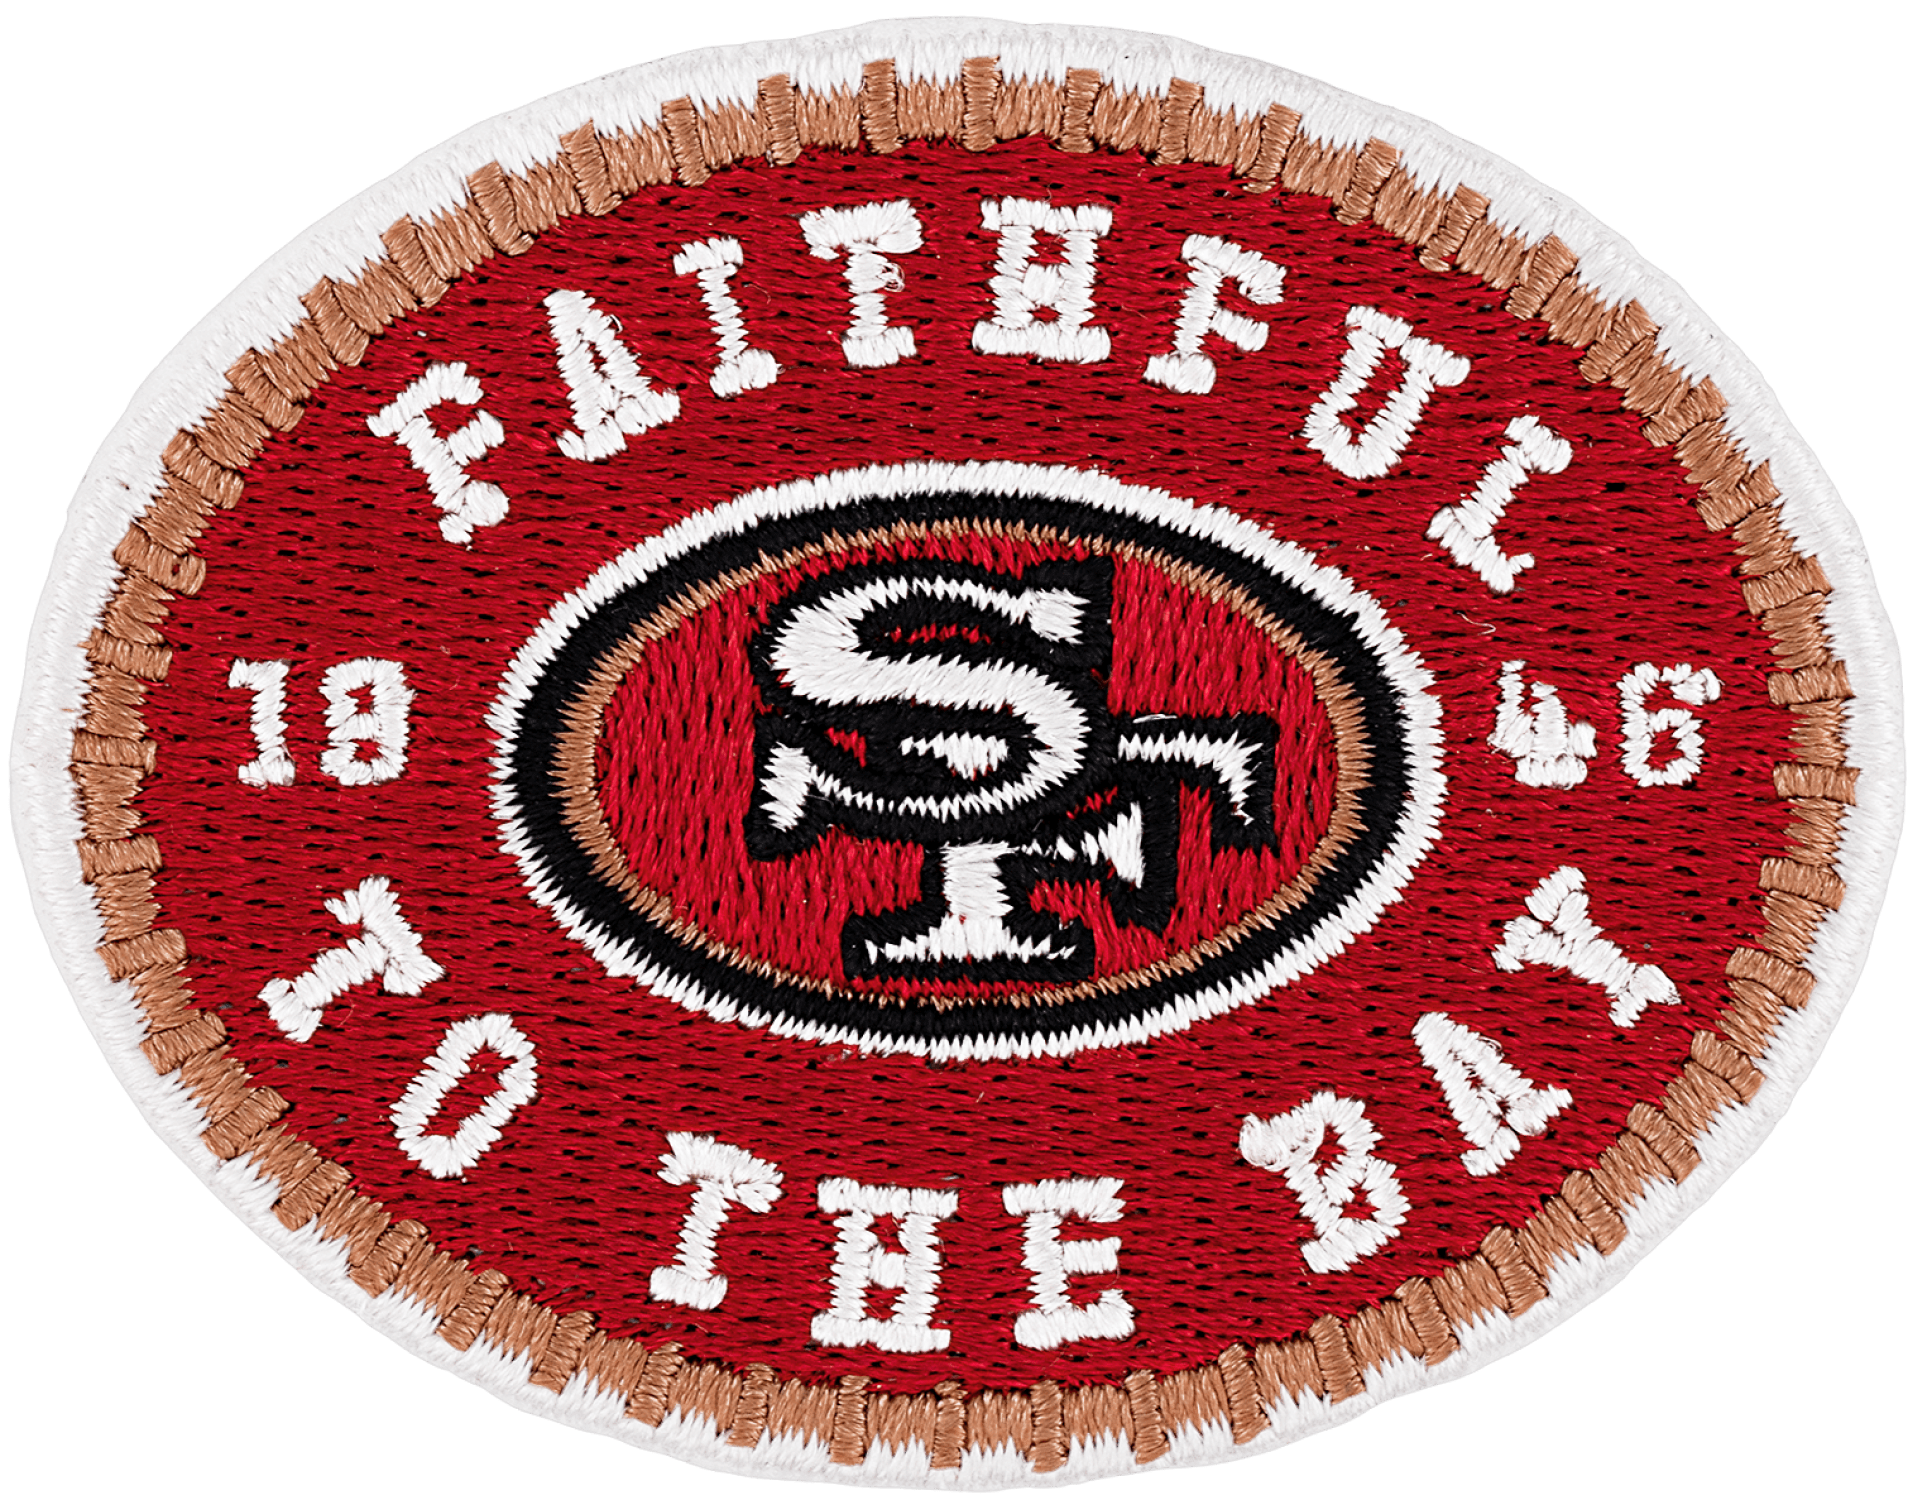 San Francisco 49ers - Patch - Back Patches - Patch Keychains